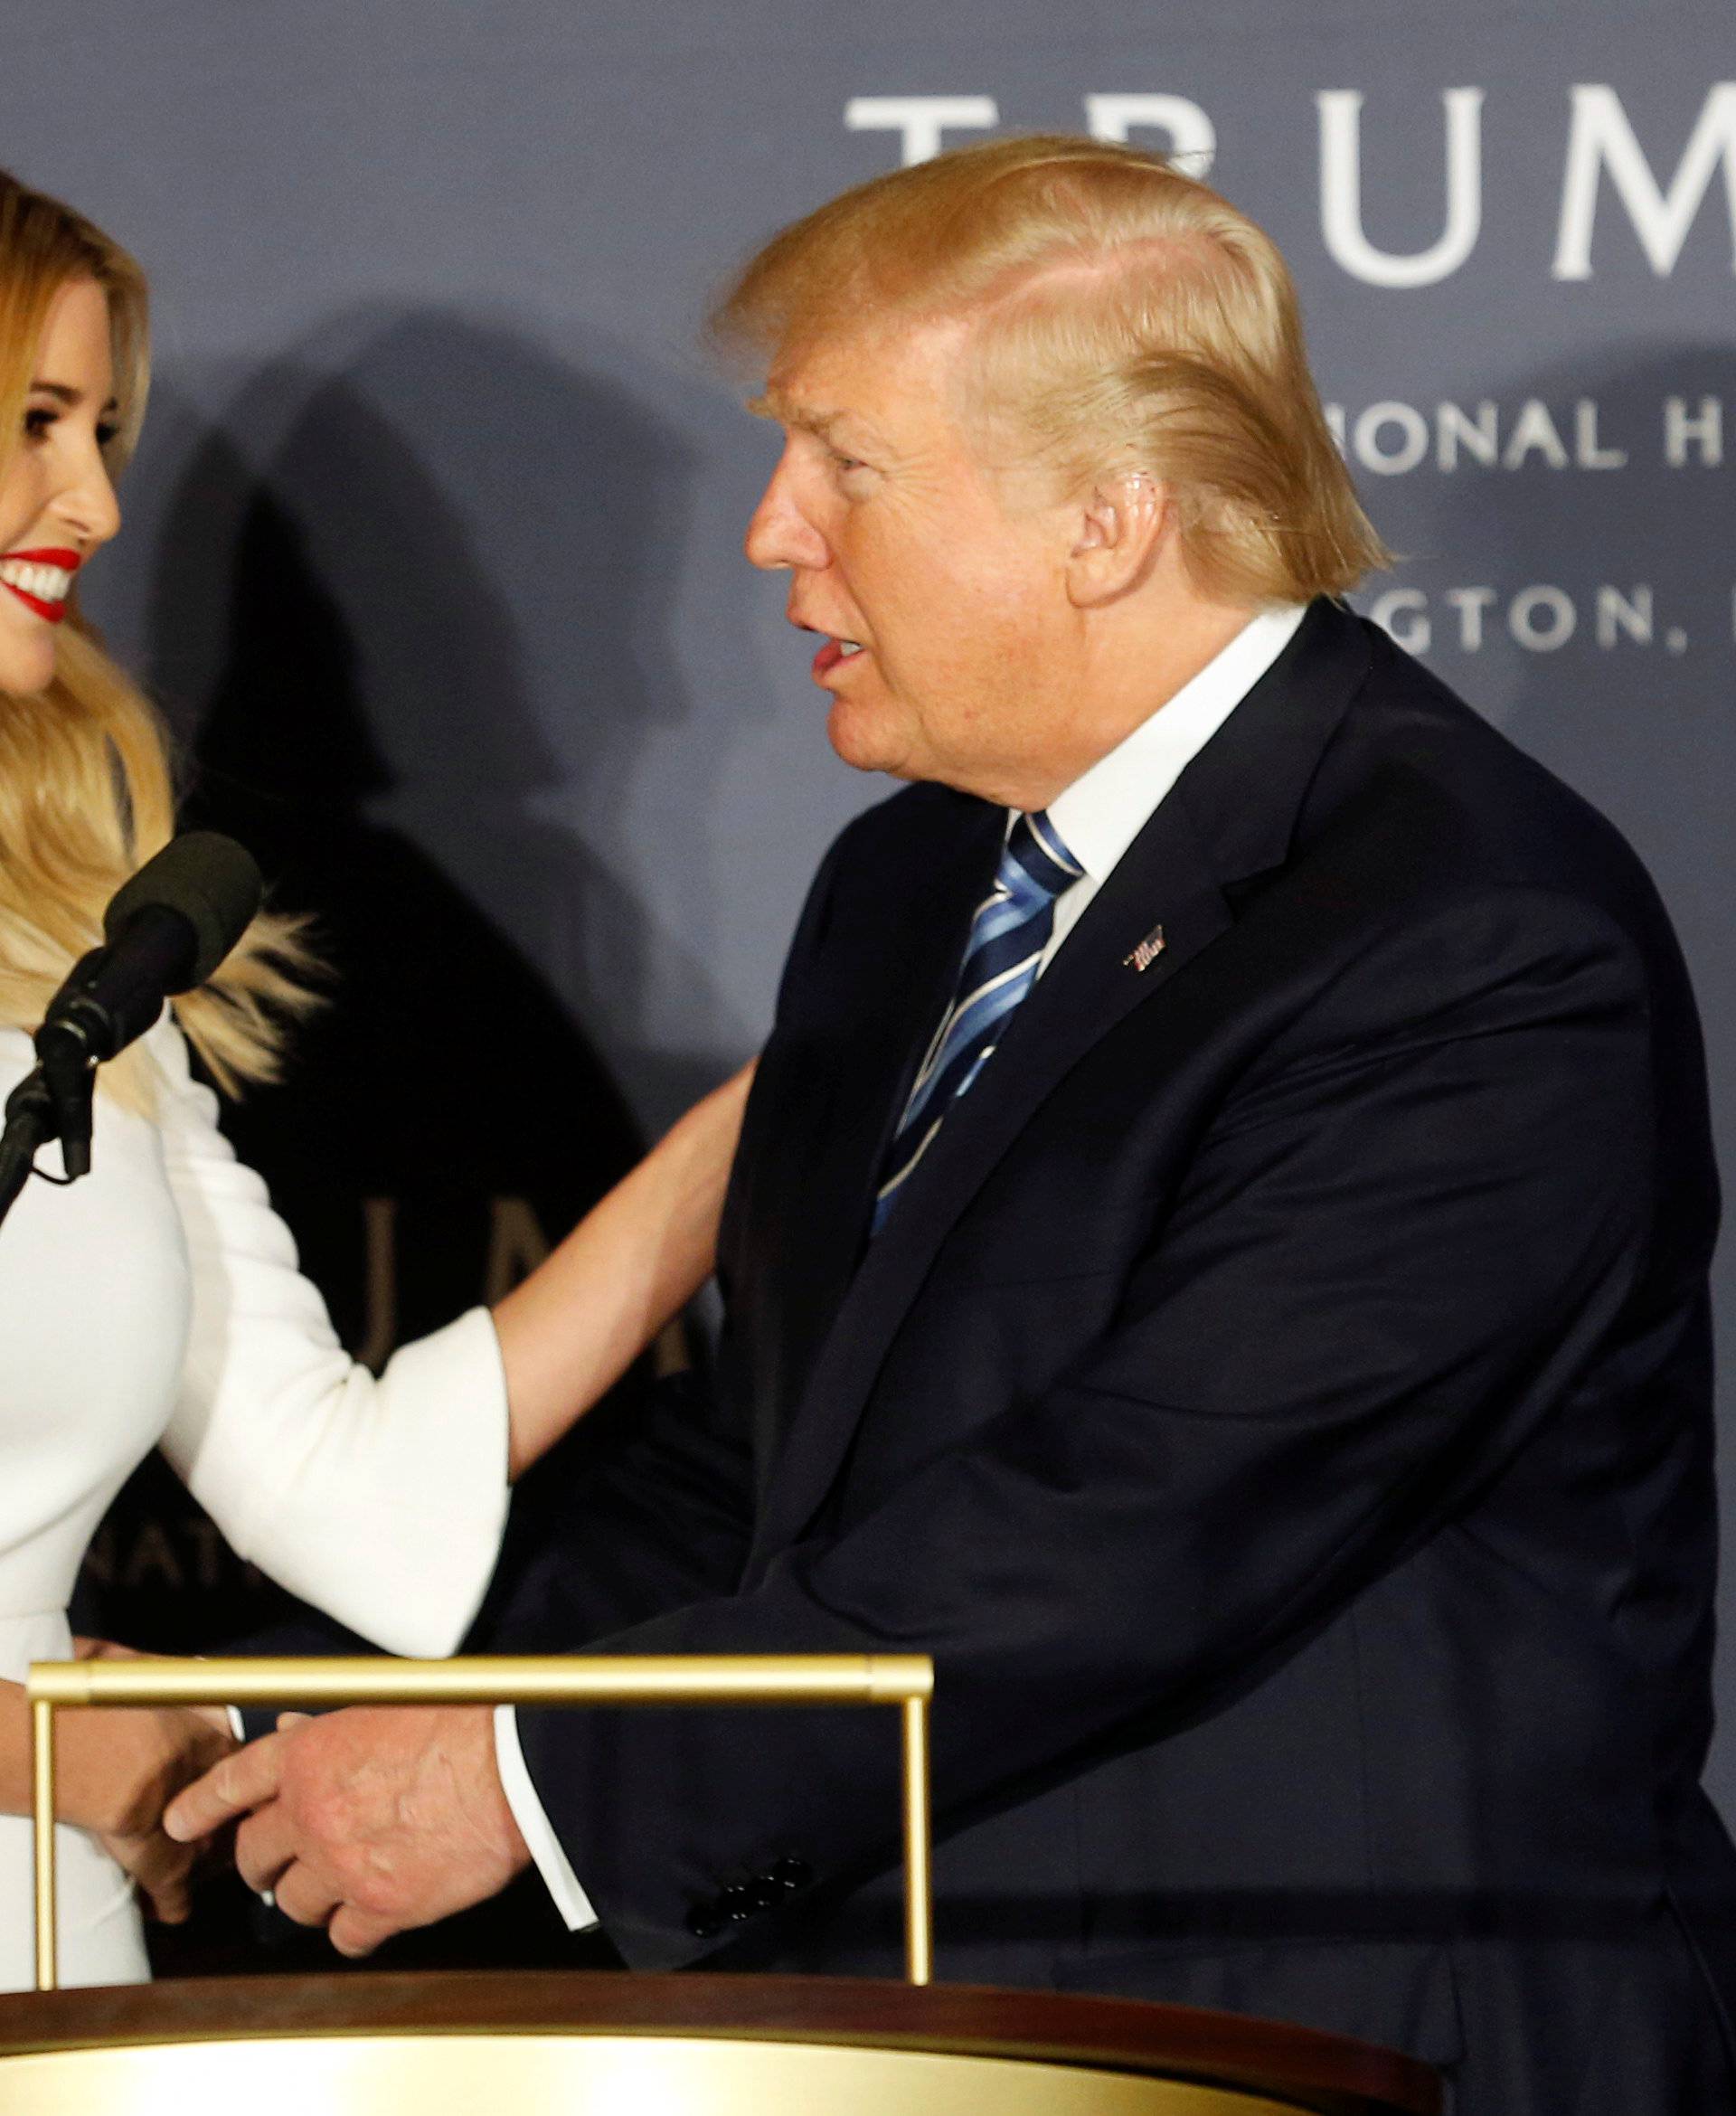 Republican US presidential nominee Trump shakes hand of daughter Ivanka at official ribbon cutting ceremony in Washington